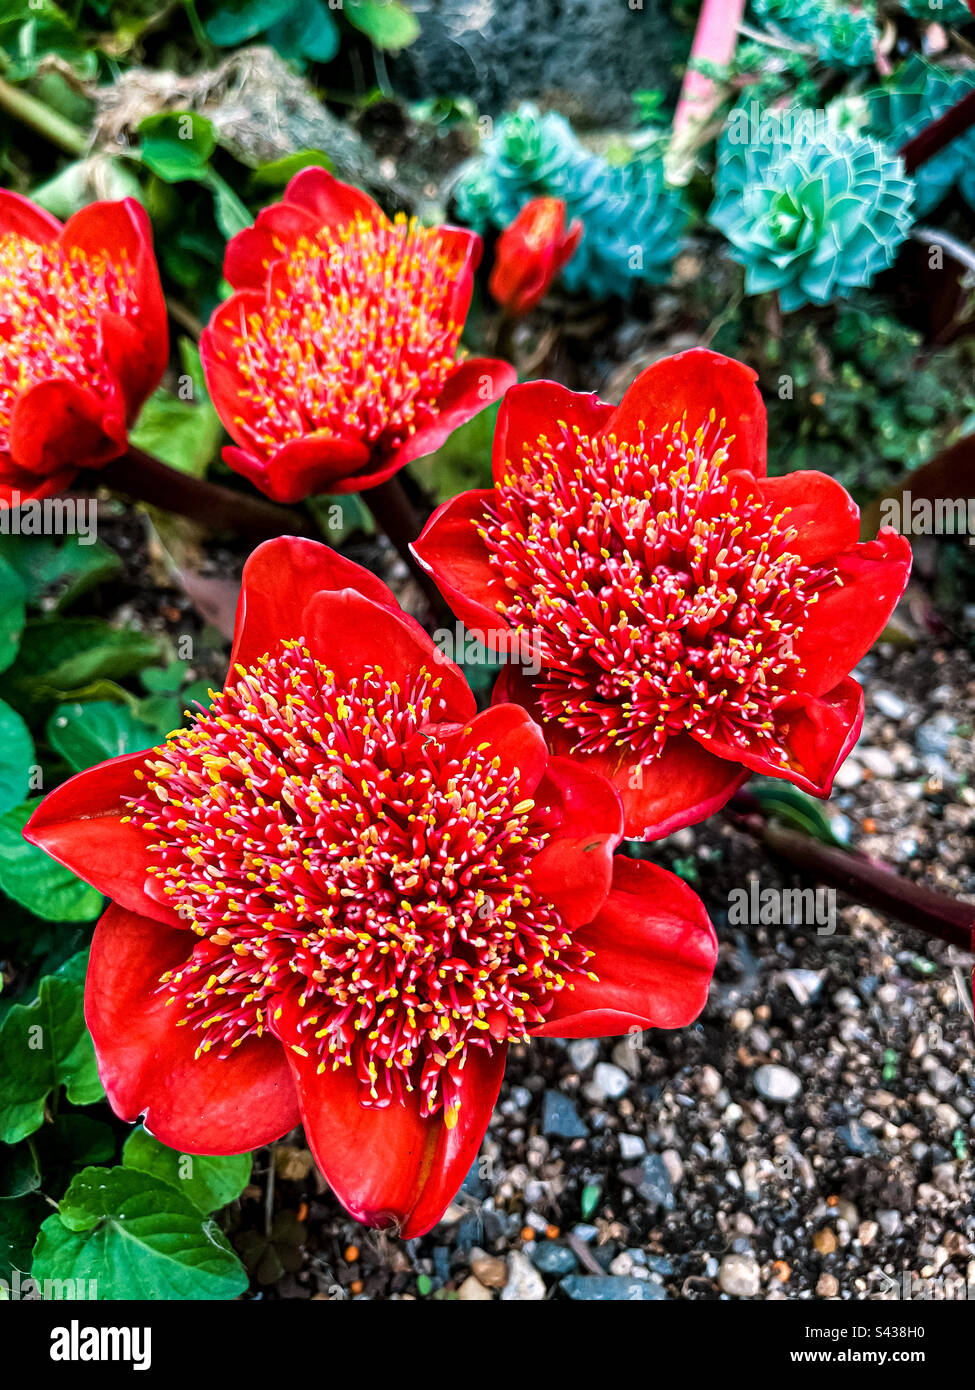 Haemanthus coccineus or the blood flower. Stock Photo